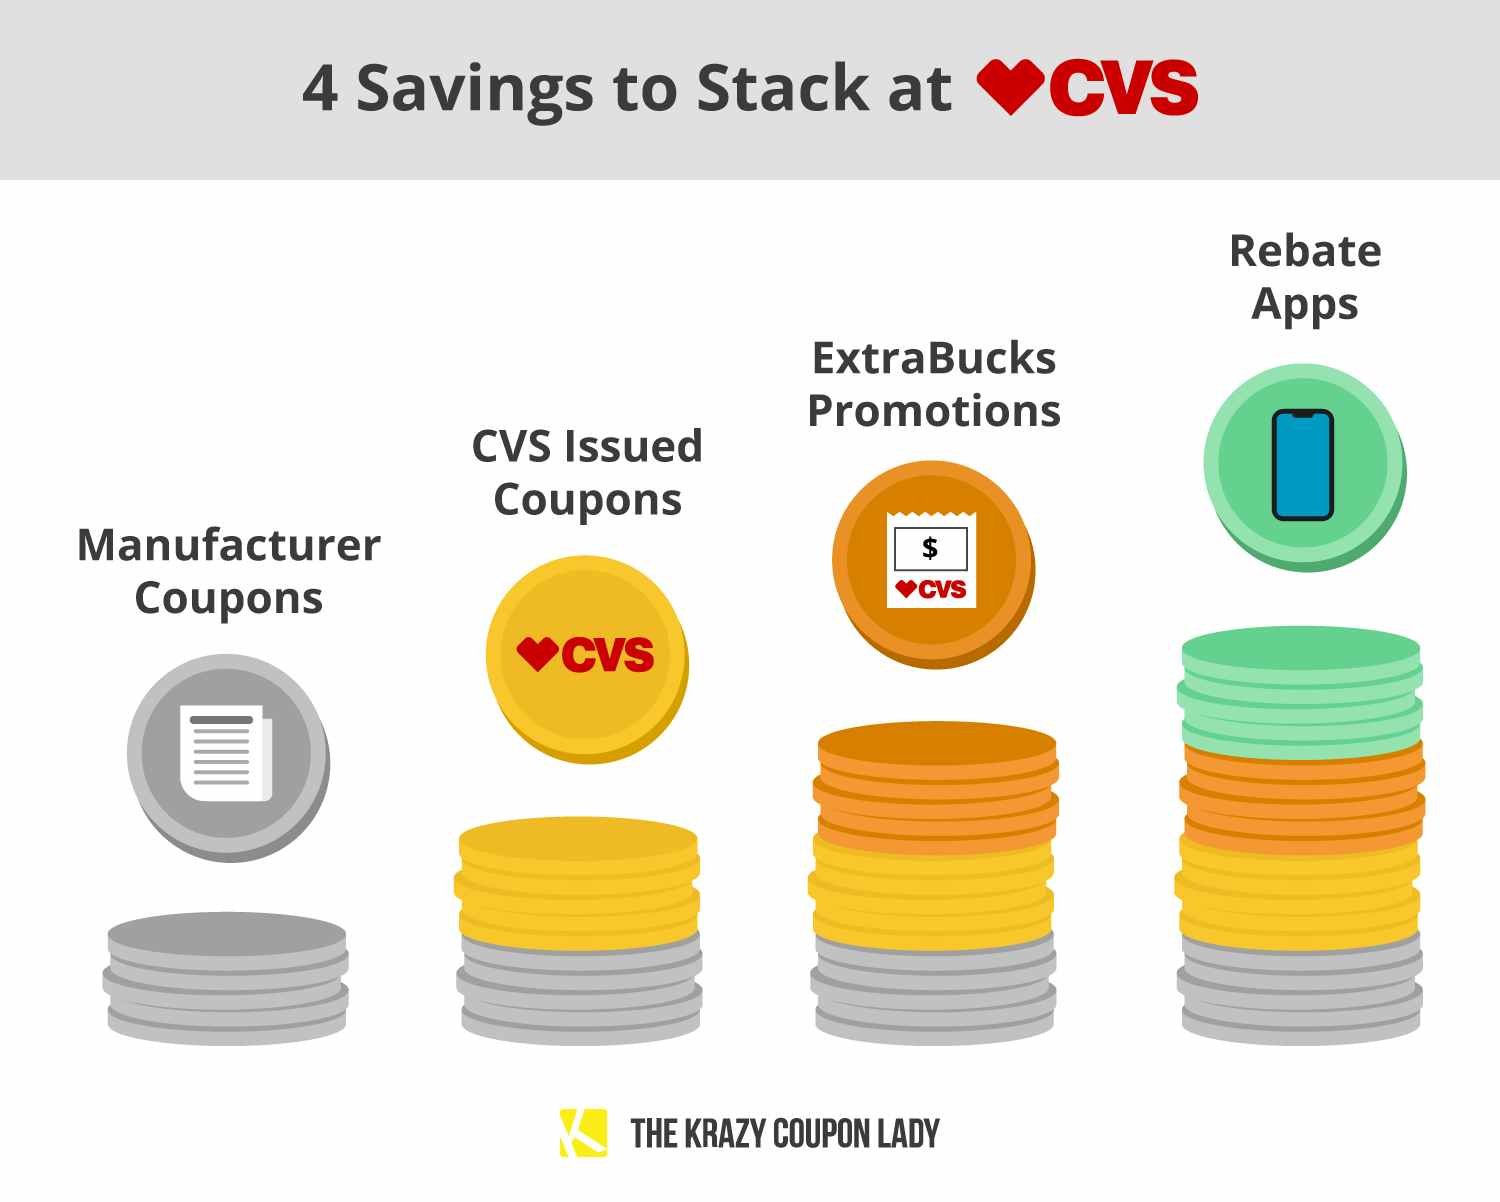 A graphic showing 4 ways to stack savings at CVS